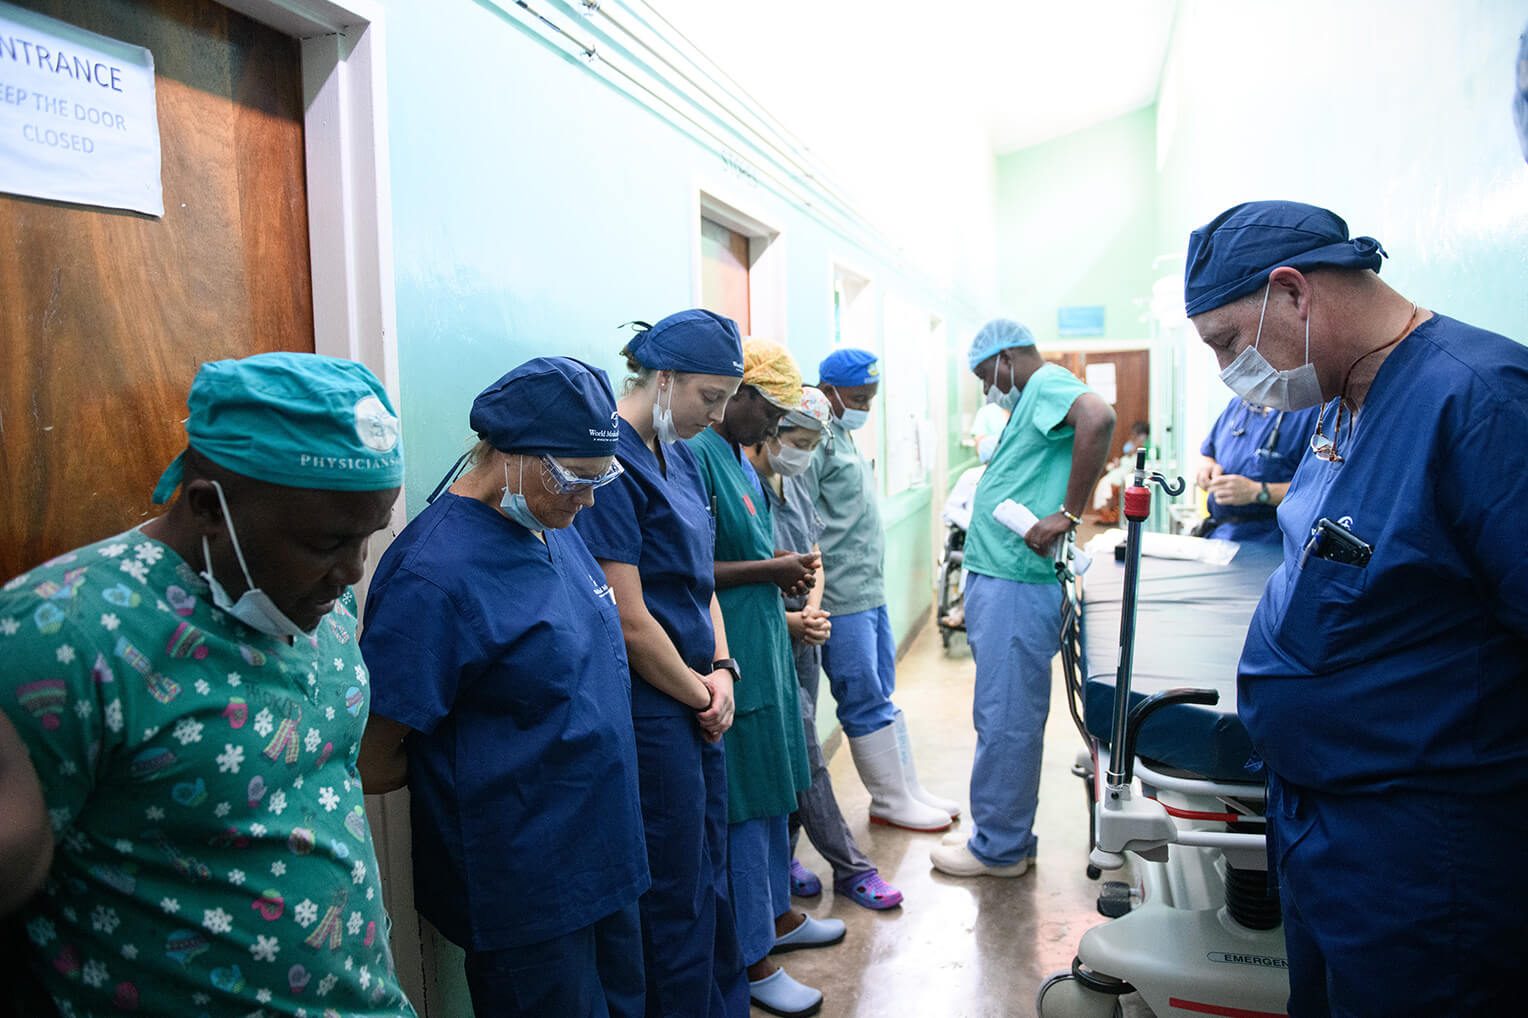 Our team prays before each surgery, asking for God's guidance and protection. We praise God for the lives our surgical team was able to impact.